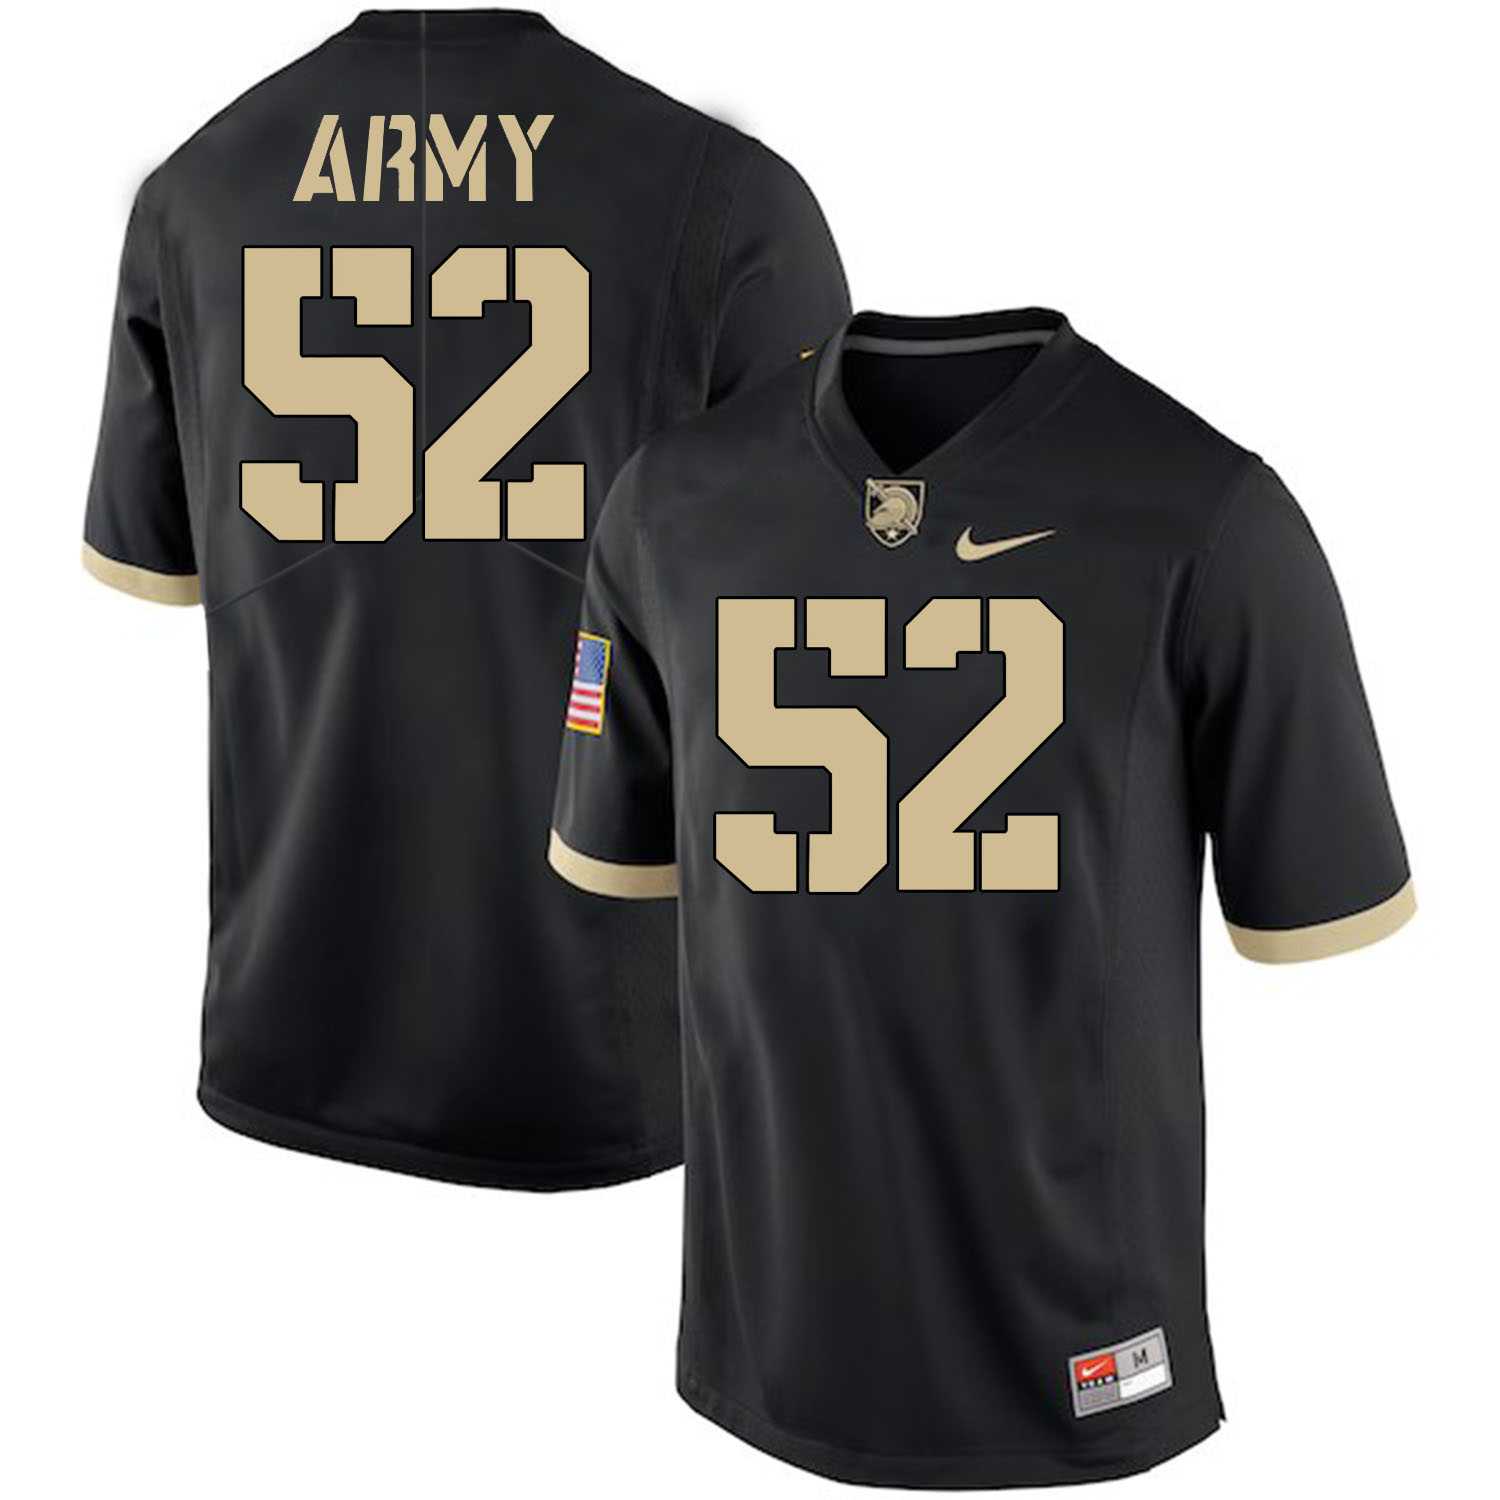 Army Black Knights #52 Spencer Welton Black College Football Jersey